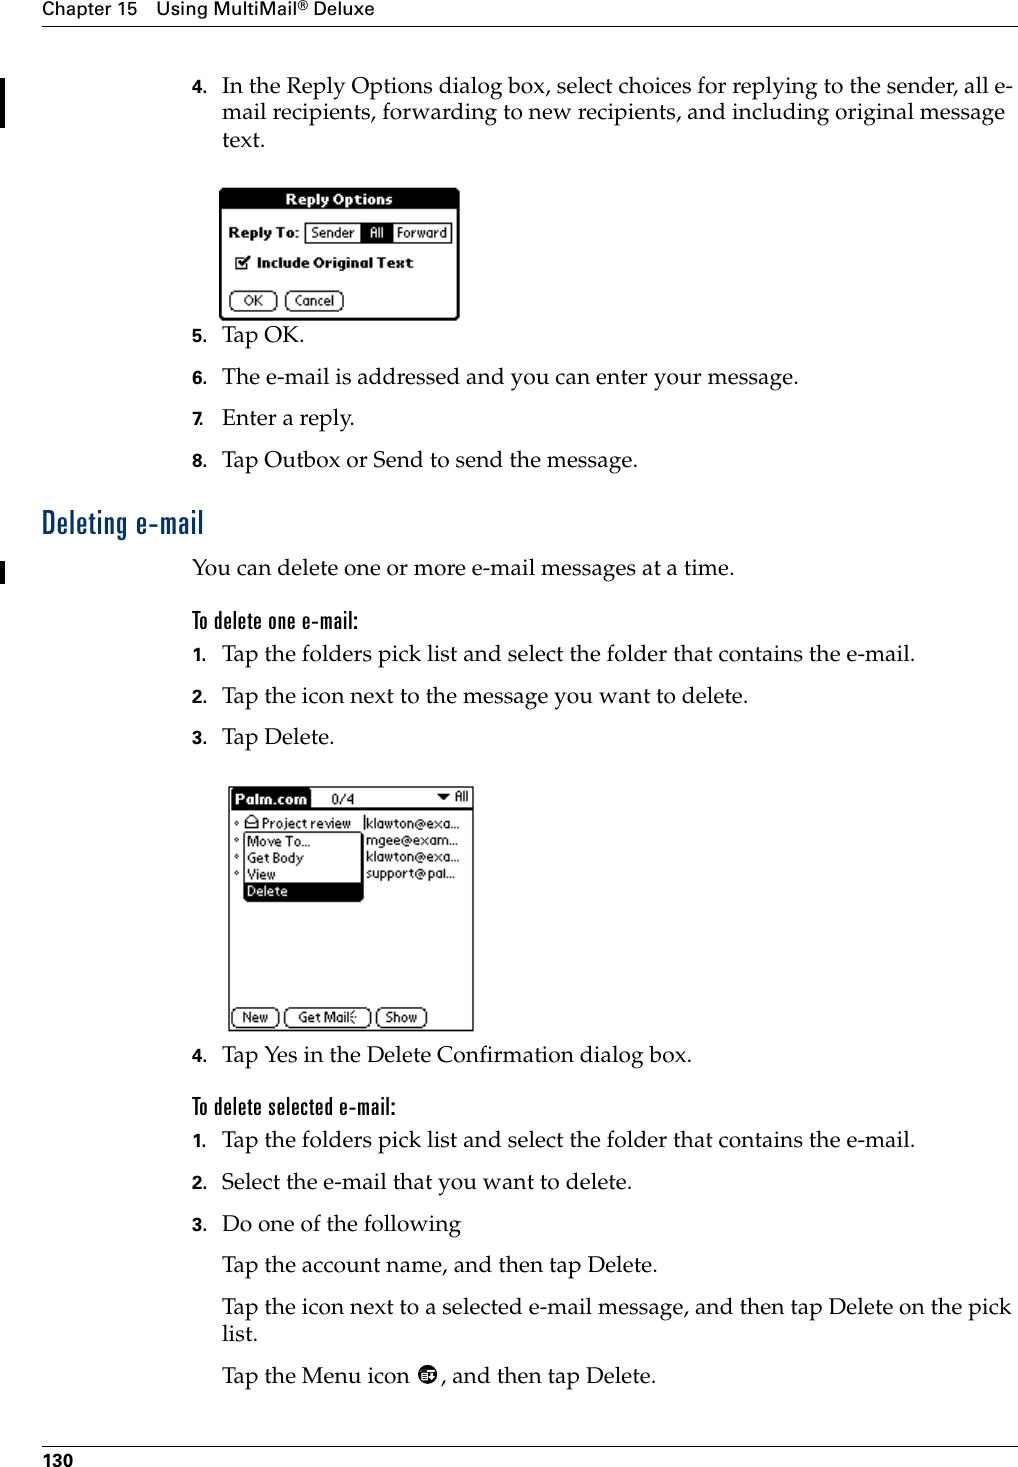 Chapter 15 Using MultiMail® Deluxe1304. In the Reply Options dialog box, select choices for replying to the sender, all e-mail recipients, forwarding to new recipients, and including original message text. 5. Tap OK.6. The e-mail is addressed and you can enter your message. 7. Enter a reply.8. Tap Outbox or Send to send the message. Deleting e-mailYou can delete one or more e-mail messages at a time.To delete one e-mail:1. Tap the folders pick list and select the folder that contains the e-mail.2. Tap the icon next to the message you want to delete.3. Tap Delete.4. Tap Yes in the Delete Confirmation dialog box.To delete selected e-mail:1. Tap the folders pick list and select the folder that contains the e-mail.2. Select the e-mail that you want to delete.3. Do one of the followingTap the account name, and then tap Delete.Tap the icon next to a selected e-mail message, and then tap Delete on the pick list.Tap the Menu icon  , and then tap Delete.